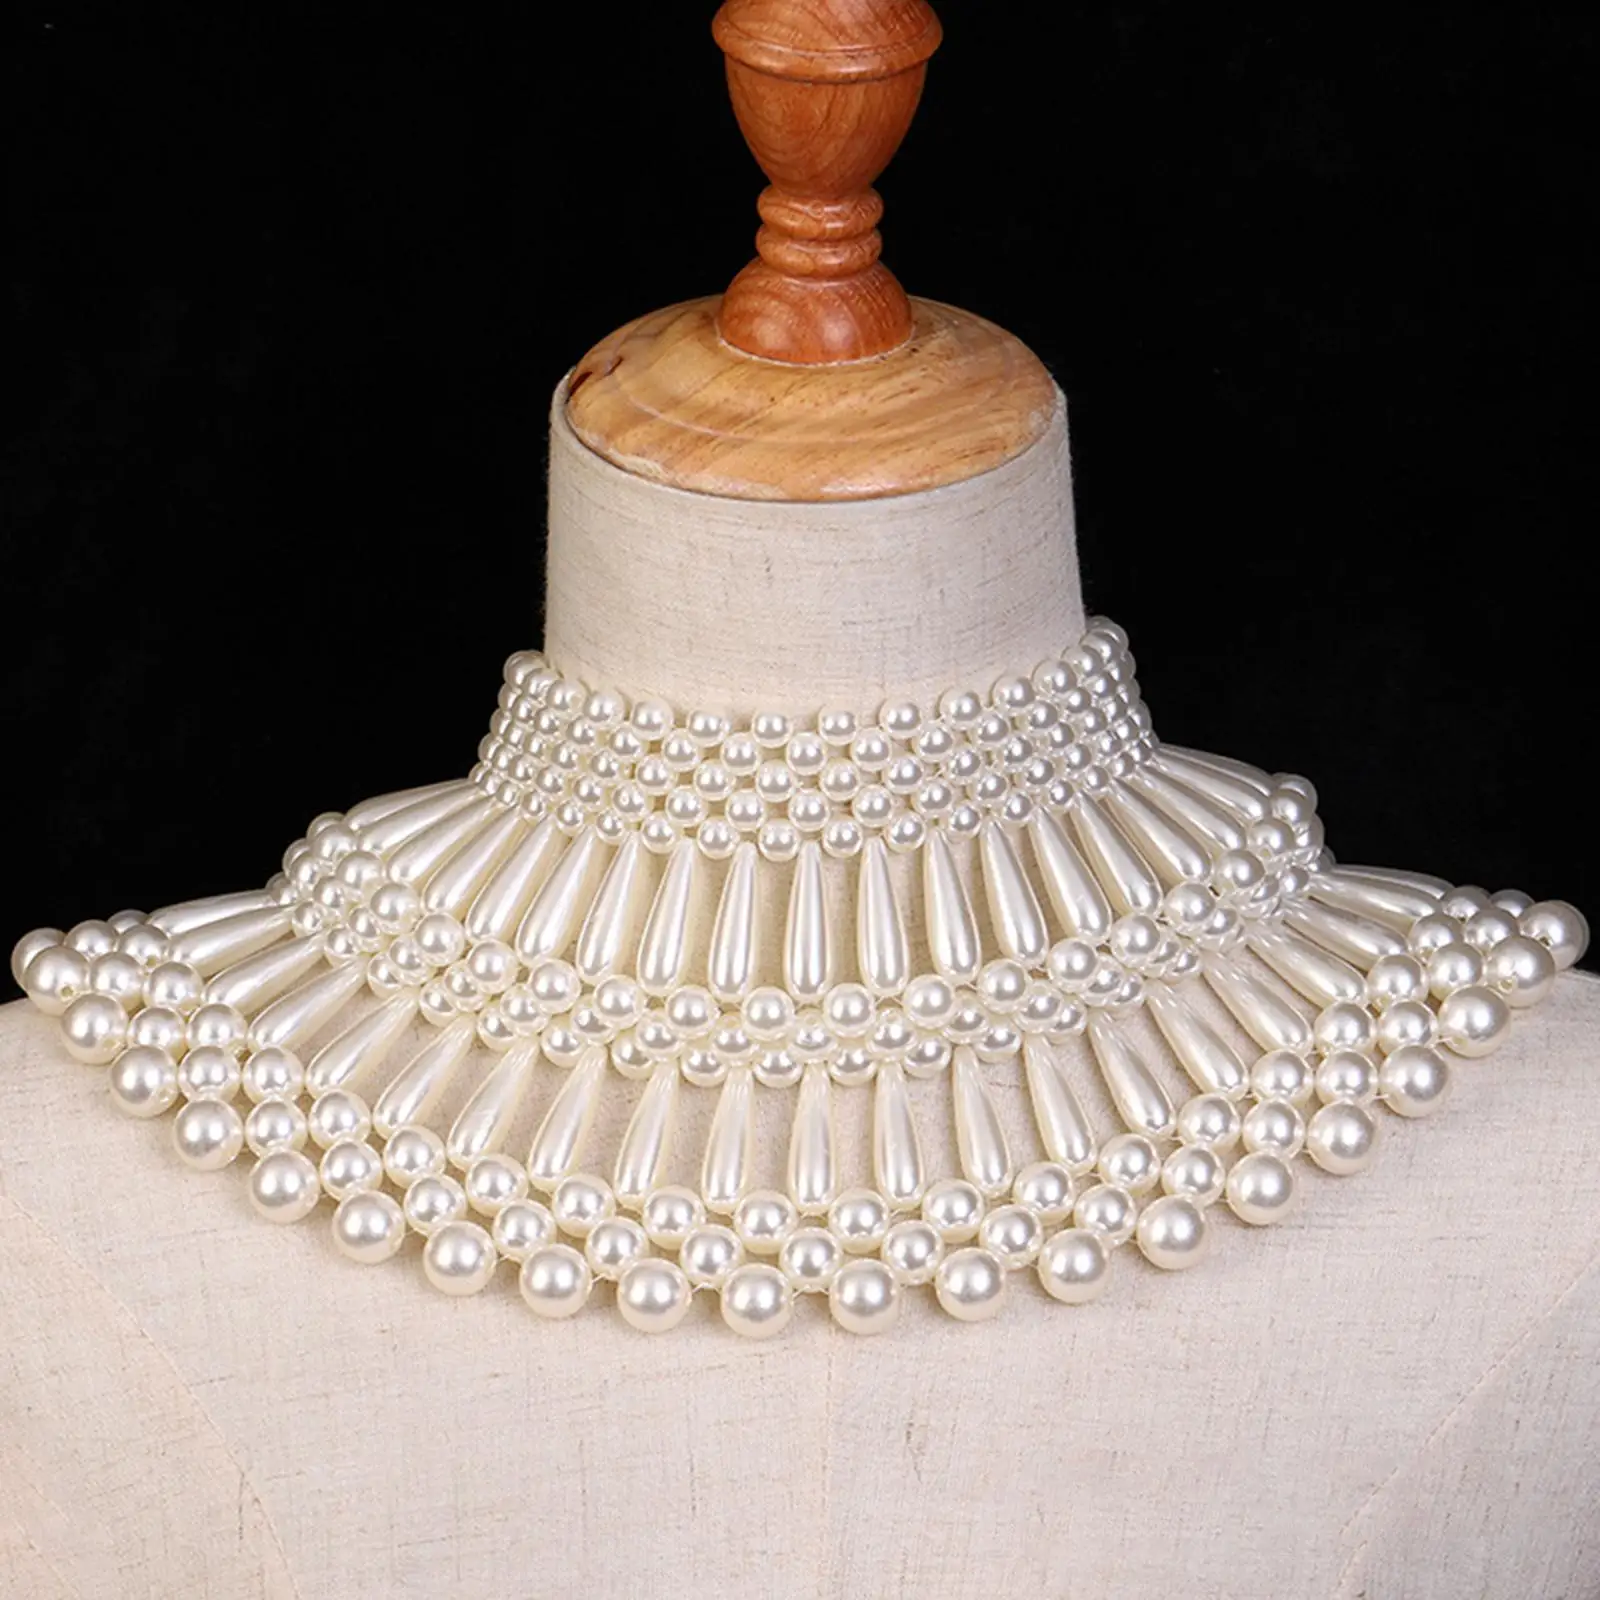 Imitation Pearl Necklace Bib Choker Necklace Jewelry for Dress Wedding Party Costume Accessories